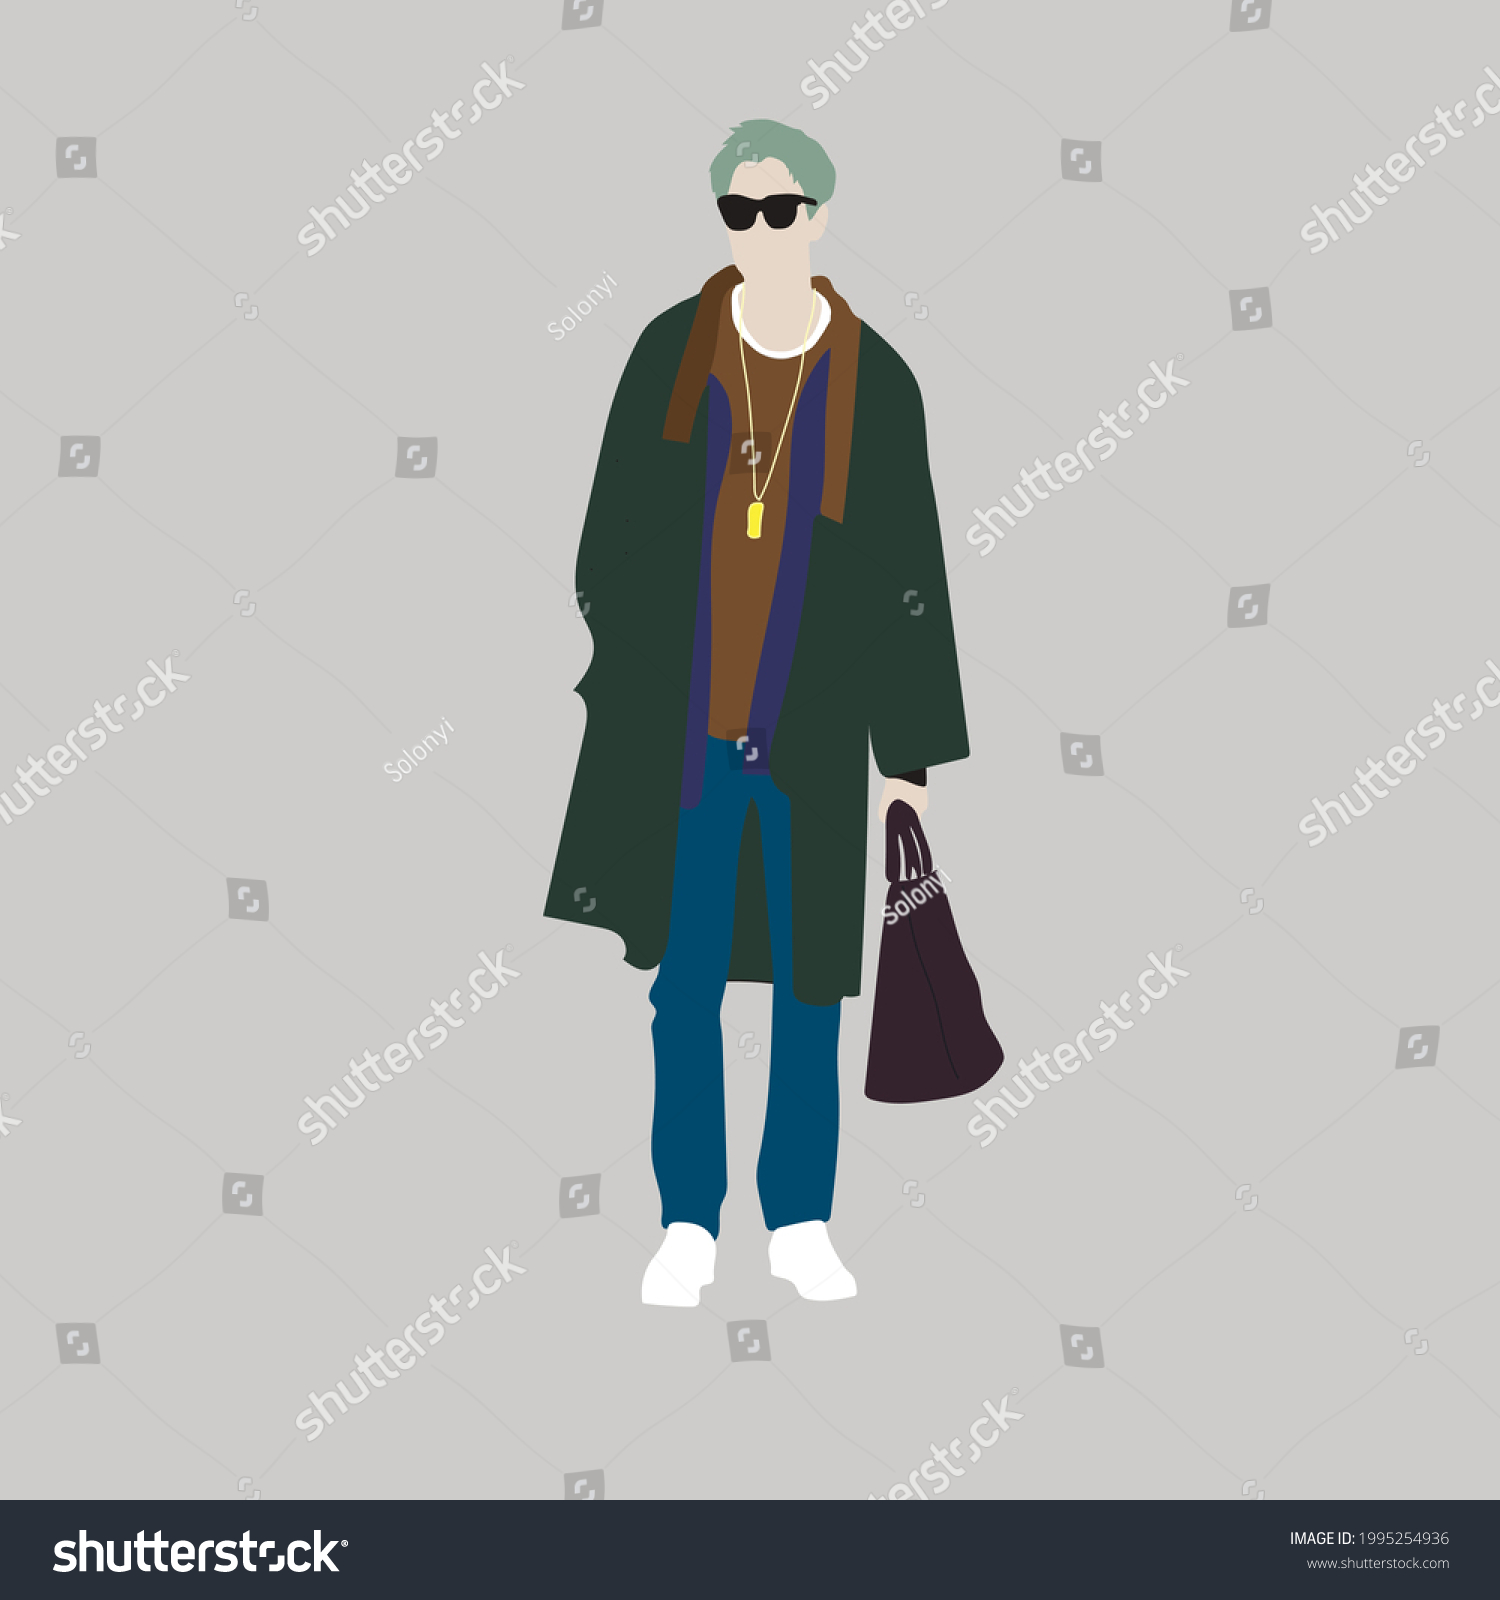 SVG of  Vector illustration of Kpop street fashion. Street idols of Koreans. Kpop men's fashion idol.A guy in a green coat with jeans and a bag. svg